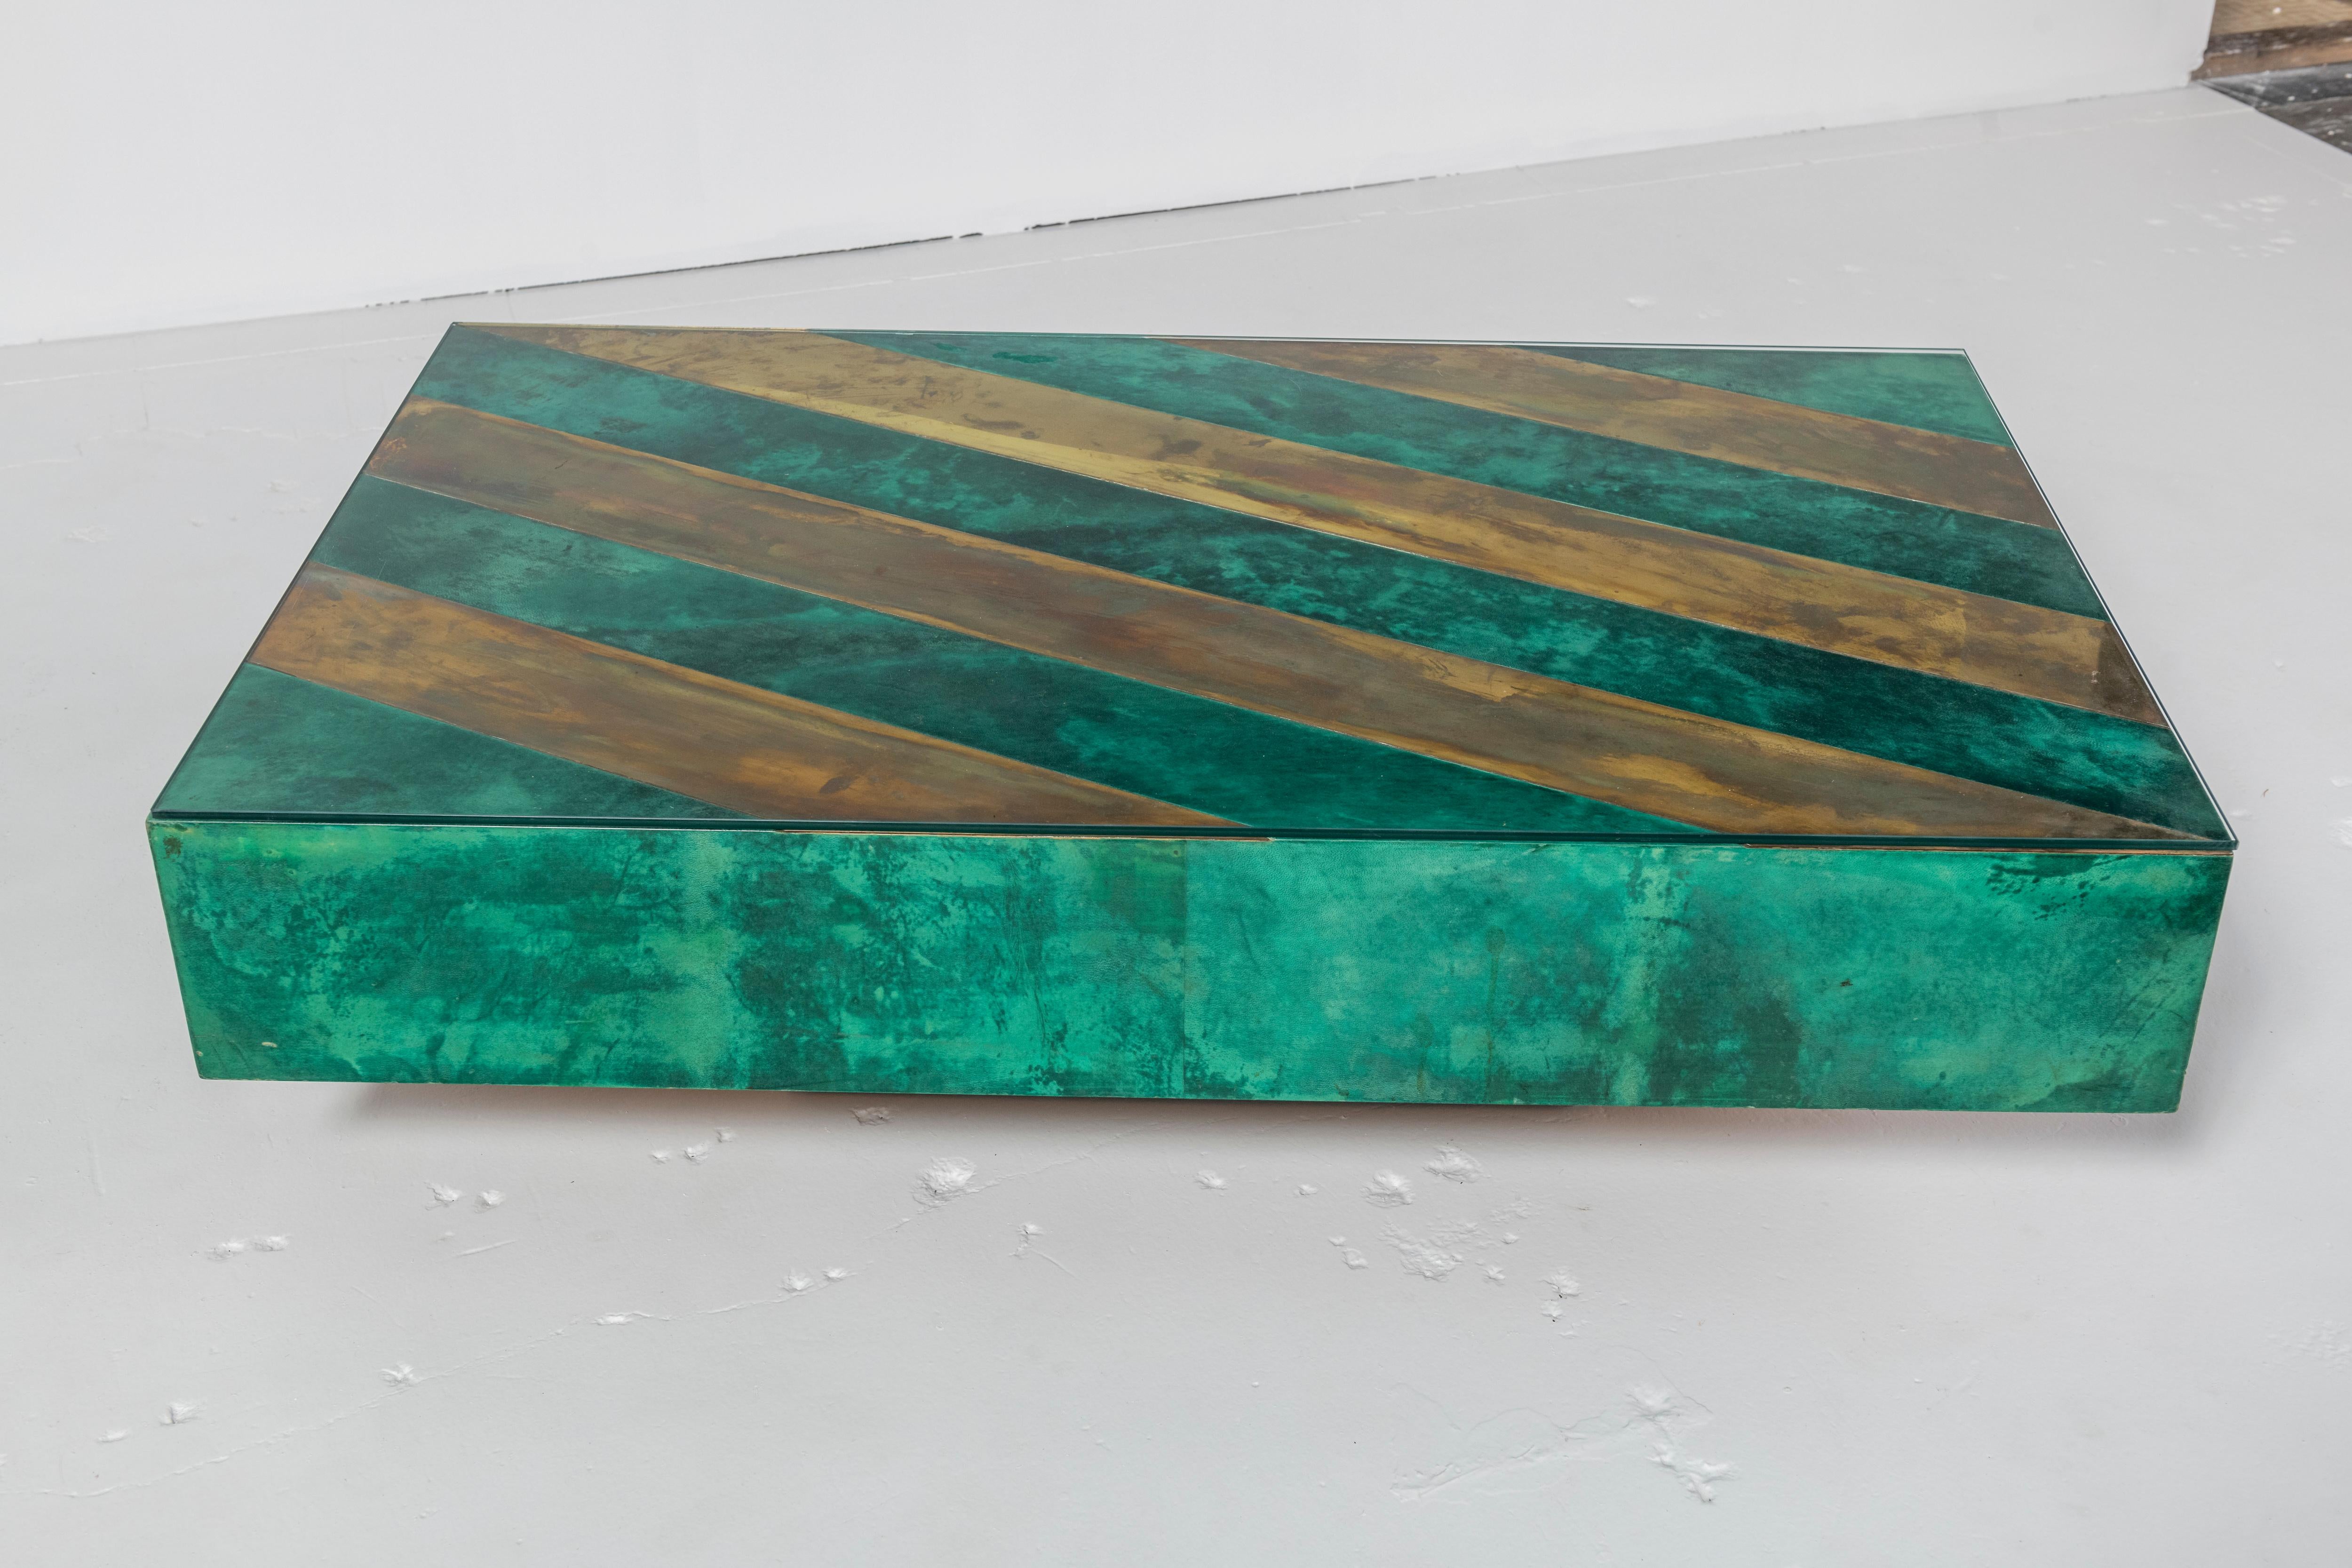 Mid-Century Modern Aldo Tura Coffee Table in Emerald Green Parchment with Brass Inlay, 1979 For Sale